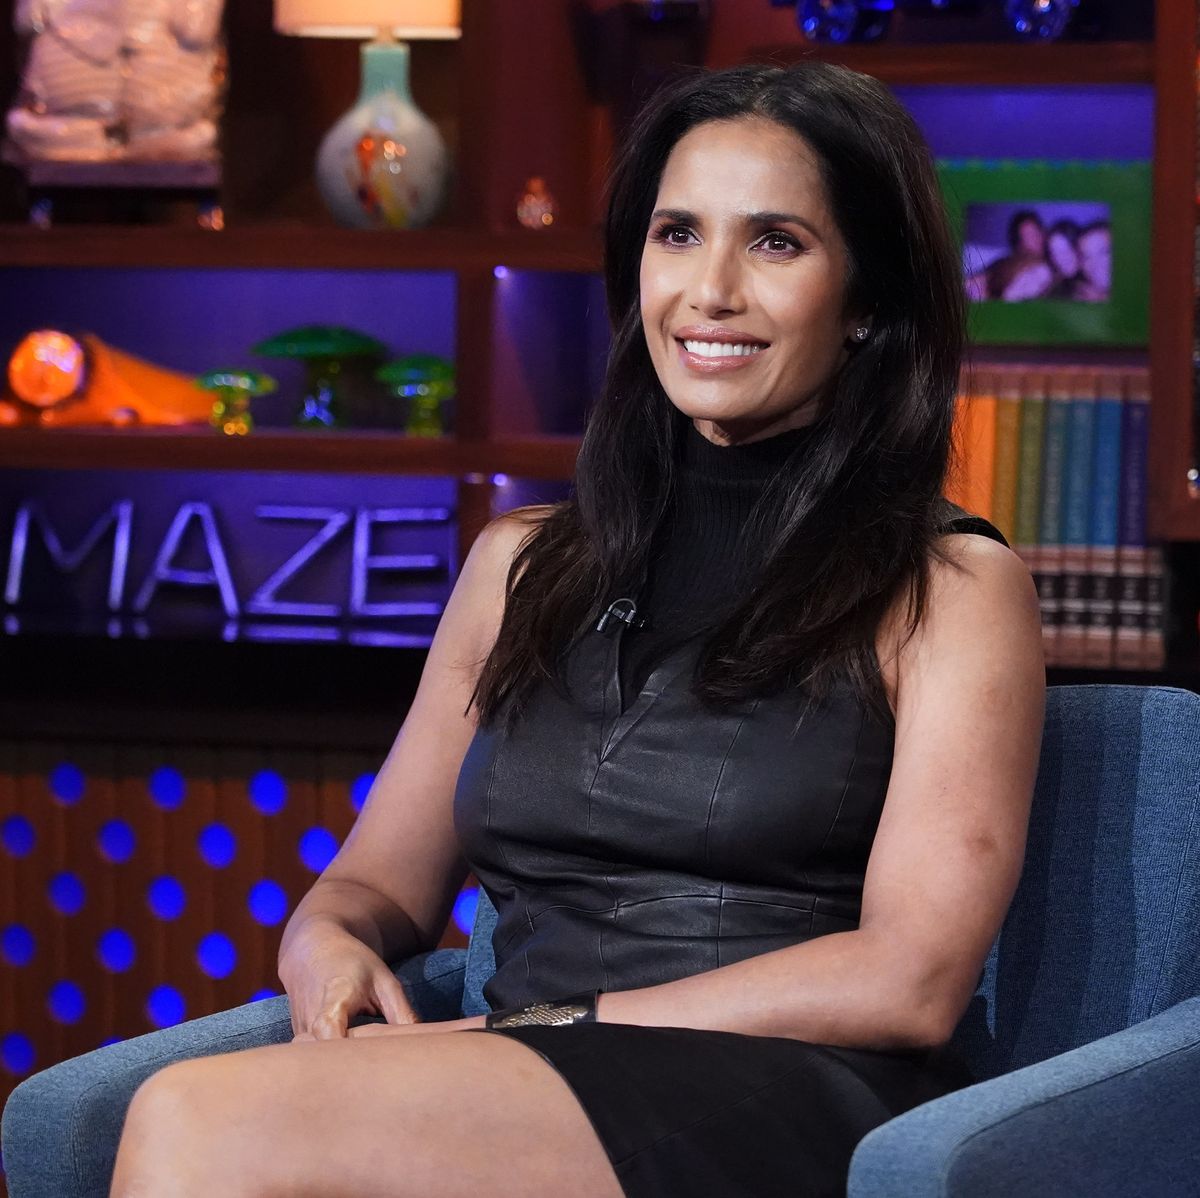 Padma Lakshmi, 51, Shows Off Killer Legs, Abs In IG Workout Video